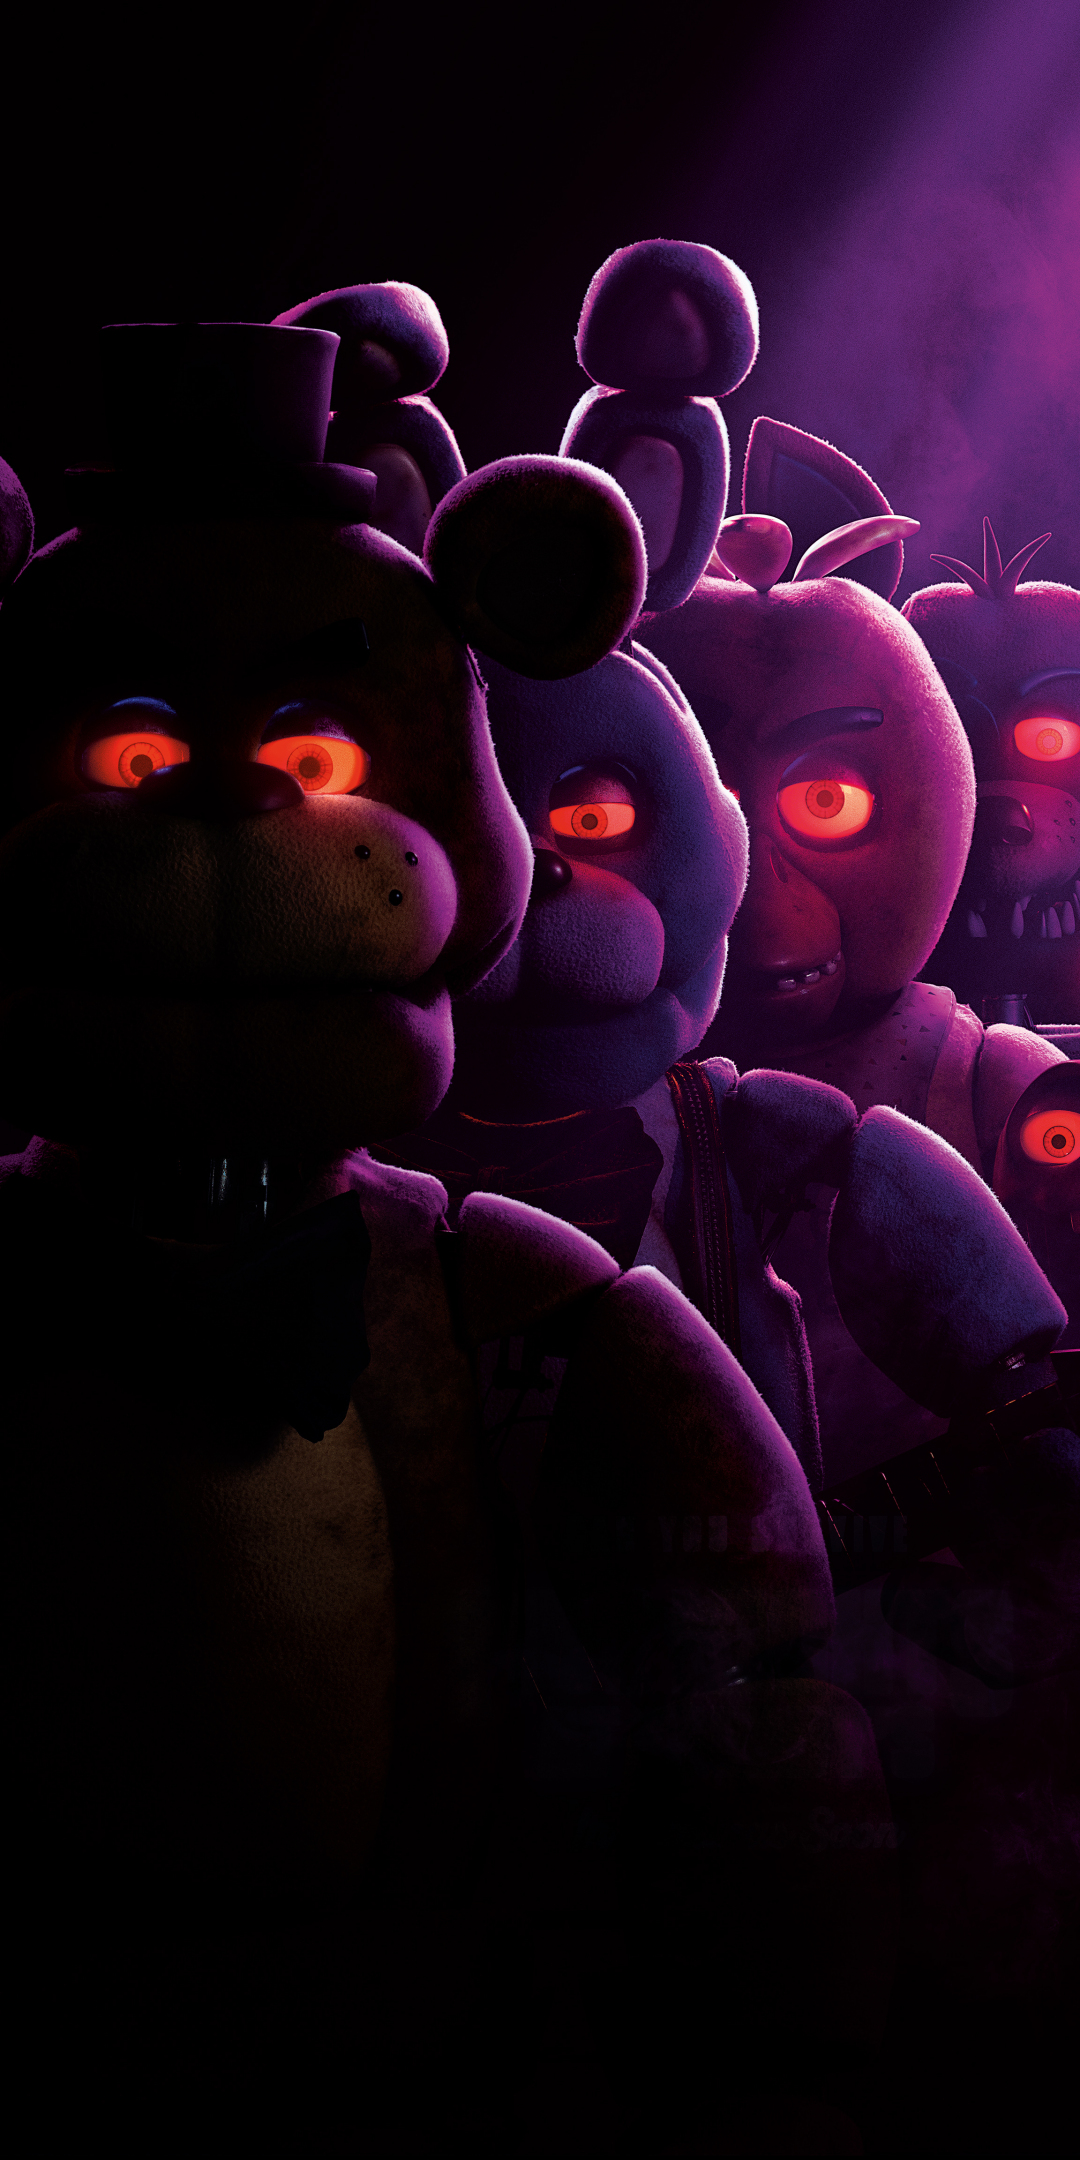 Five Nights at Freddy's, horror movies, toys, 1080x2160 wallpaper